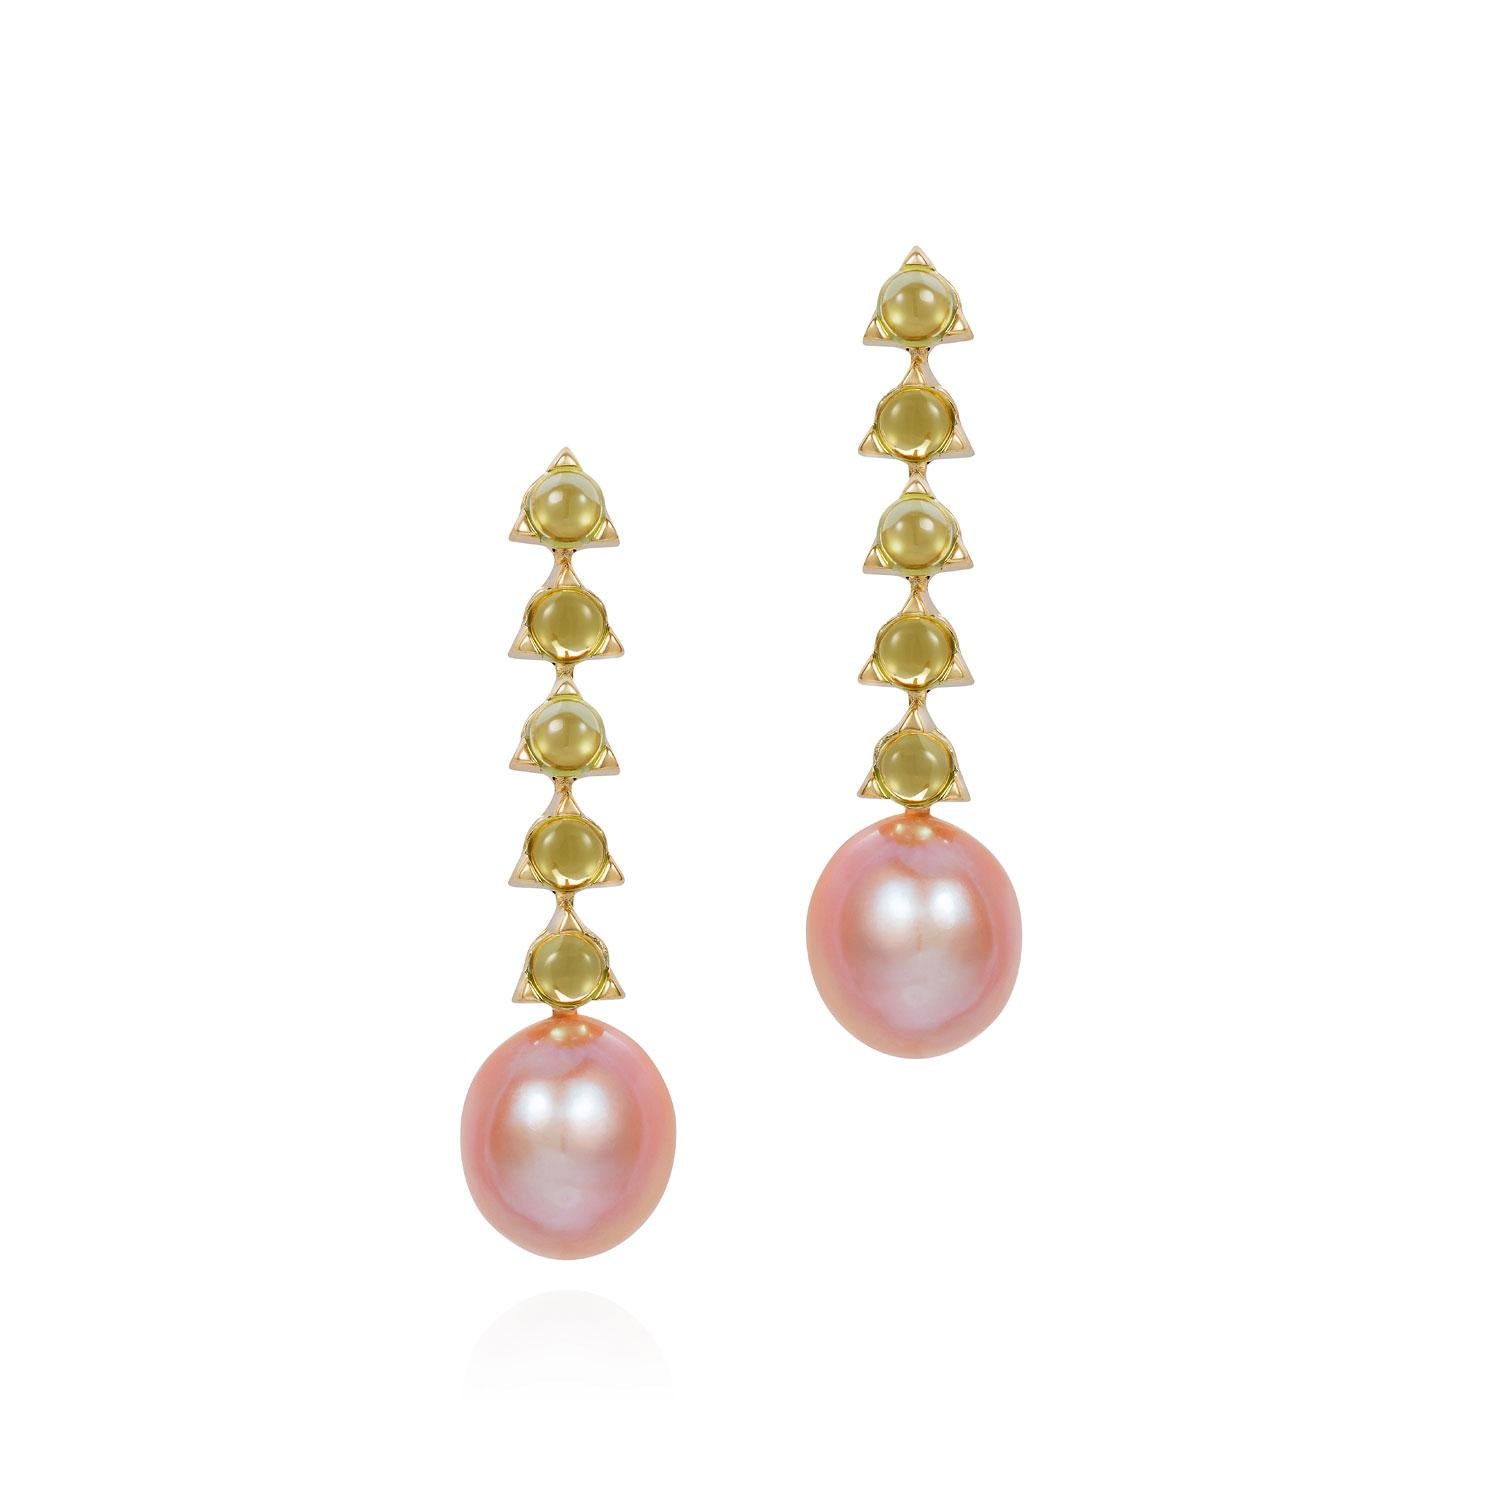 Contemporary 5- 4mm Stone Baroque Peach/Violet Pearl Earrings, Citrine, 18 Karat Yellow Gold For Sale